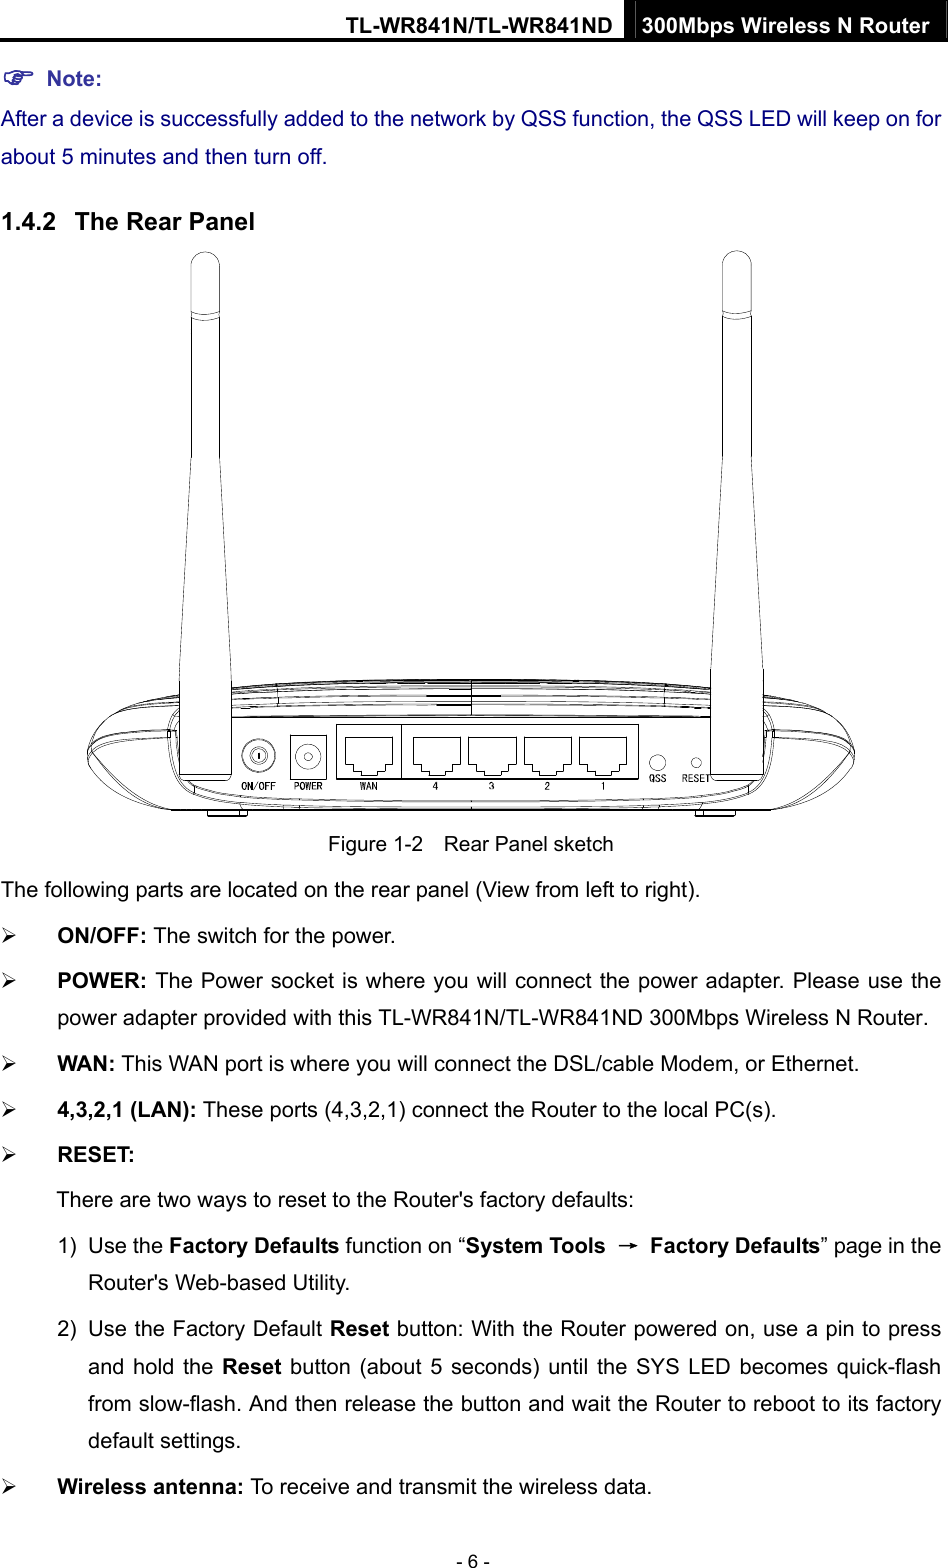 TL-WR841N/TL-WR841ND 300Mbps Wireless N Router - 6 - ) Note: After a device is successfully added to the network by QSS function, the QSS LED will keep on for about 5 minutes and then turn off.   1.4.2  The Rear Panel  Figure 1-2    Rear Panel sketch The following parts are located on the rear panel (View from left to right). ¾ ON/OFF: The switch for the power. ¾ POWER: The Power socket is where you will connect the power adapter. Please use the power adapter provided with this TL-WR841N/TL-WR841ND 300Mbps Wireless N Router. ¾ WAN: This WAN port is where you will connect the DSL/cable Modem, or Ethernet. ¾ 4,3,2,1 (LAN): These ports (4,3,2,1) connect the Router to the local PC(s). ¾ RESET: There are two ways to reset to the Router&apos;s factory defaults: 1) Use the Factory Defaults function on “System Tools  → Factory Defaults” page in the Router&apos;s Web-based Utility. 2)  Use the Factory Default Reset button: With the Router powered on, use a pin to press and hold the Reset button (about 5 seconds) until the SYS LED becomes quick-flash from slow-flash. And then release the button and wait the Router to reboot to its factory default settings. ¾ Wireless antenna: To receive and transmit the wireless data. 